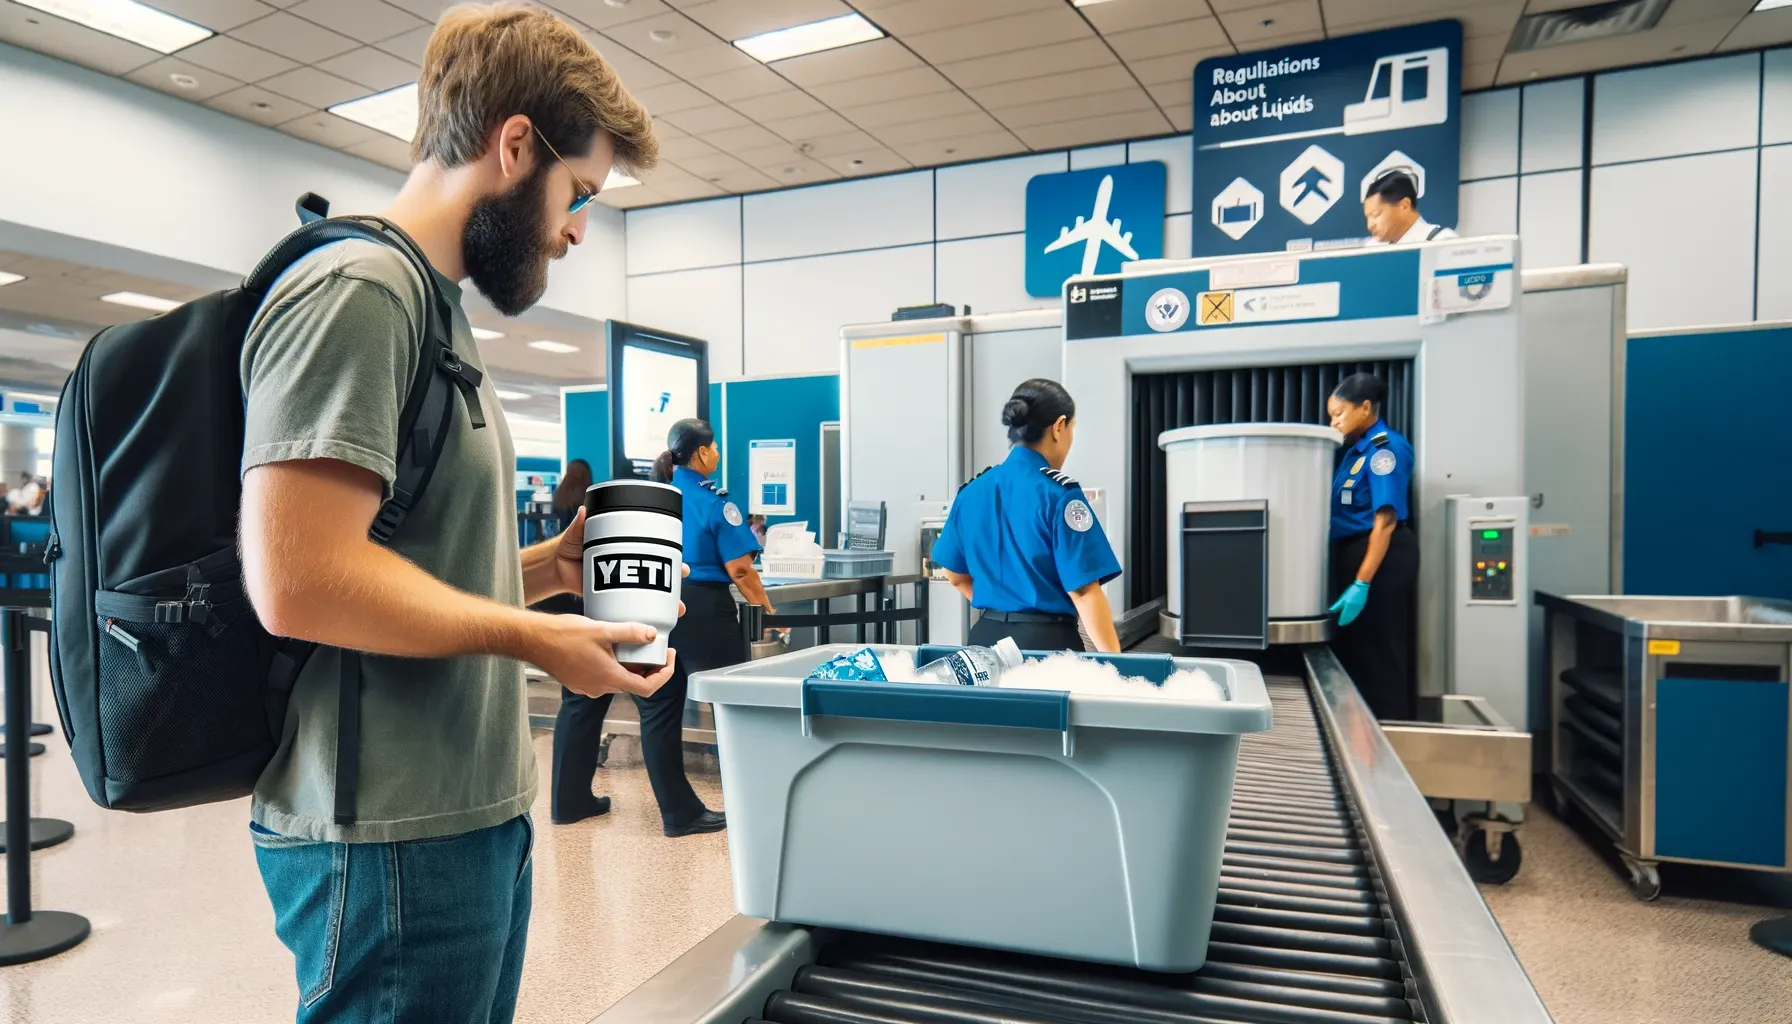 Traveling with a Yeti cup at airport security